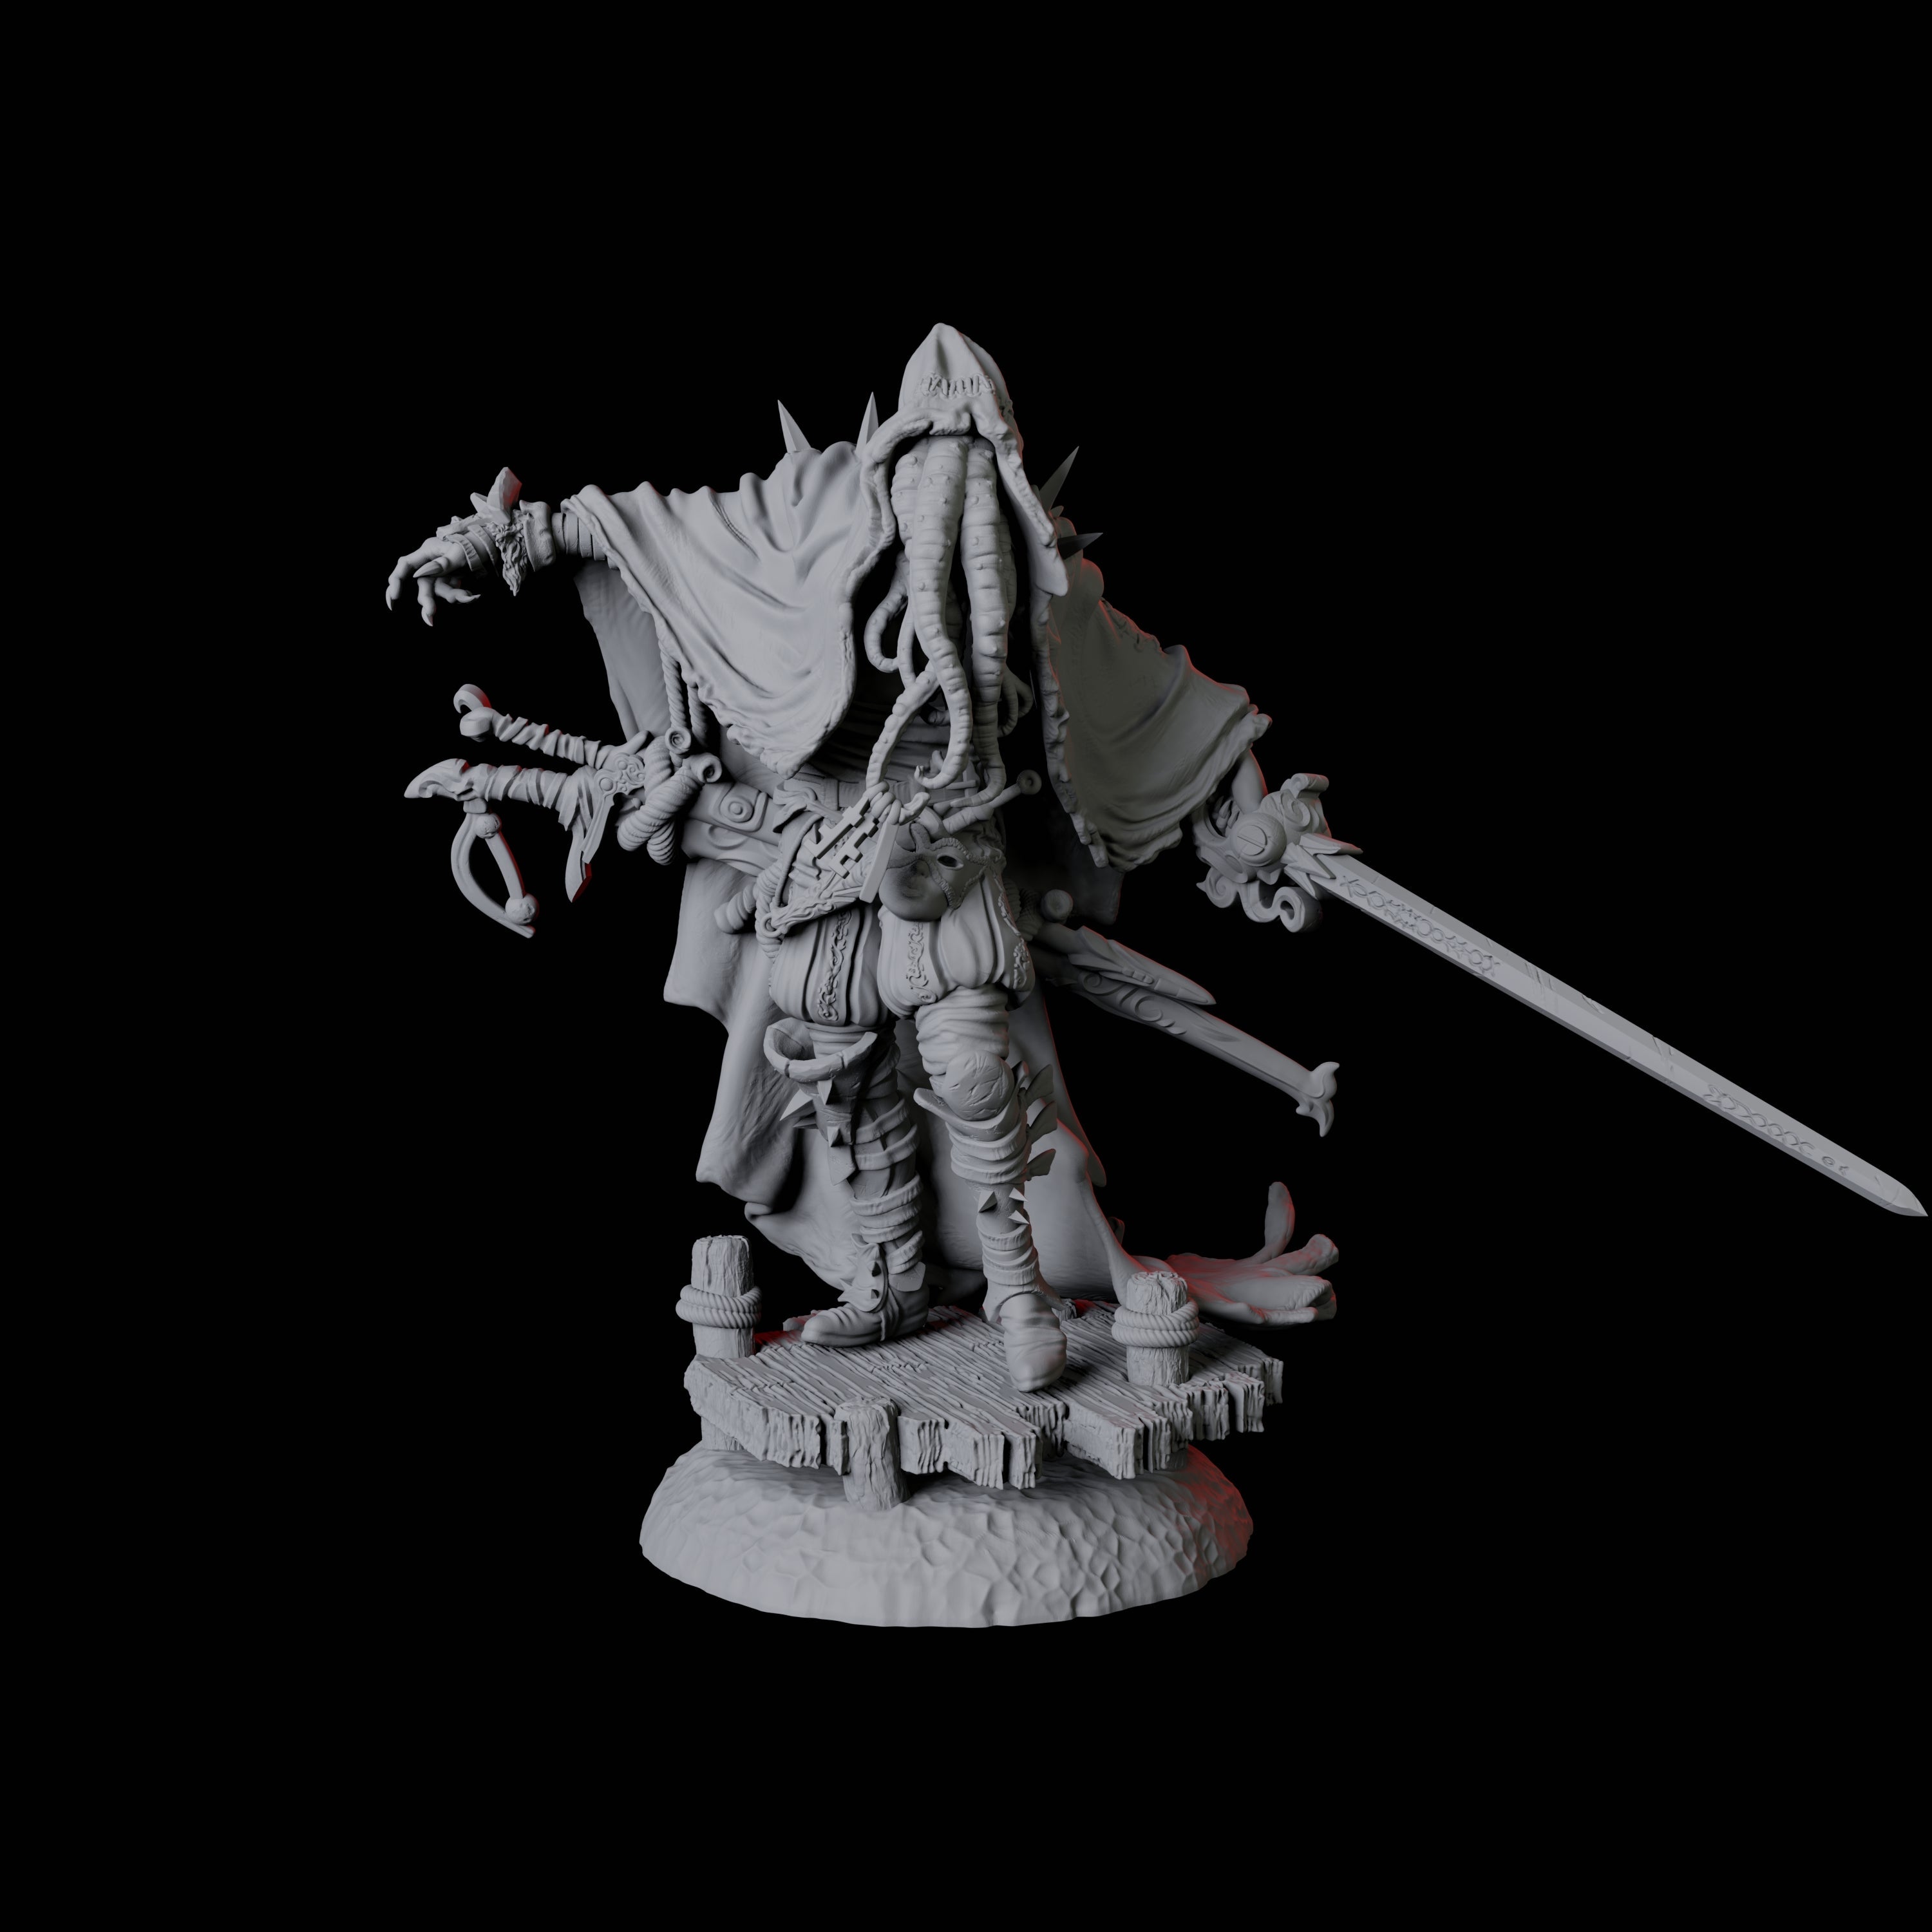 Plane Hopping Astral Mind Flayer Assassin Miniature for Dungeons and Dragons, Pathfinder or other TTRPGs